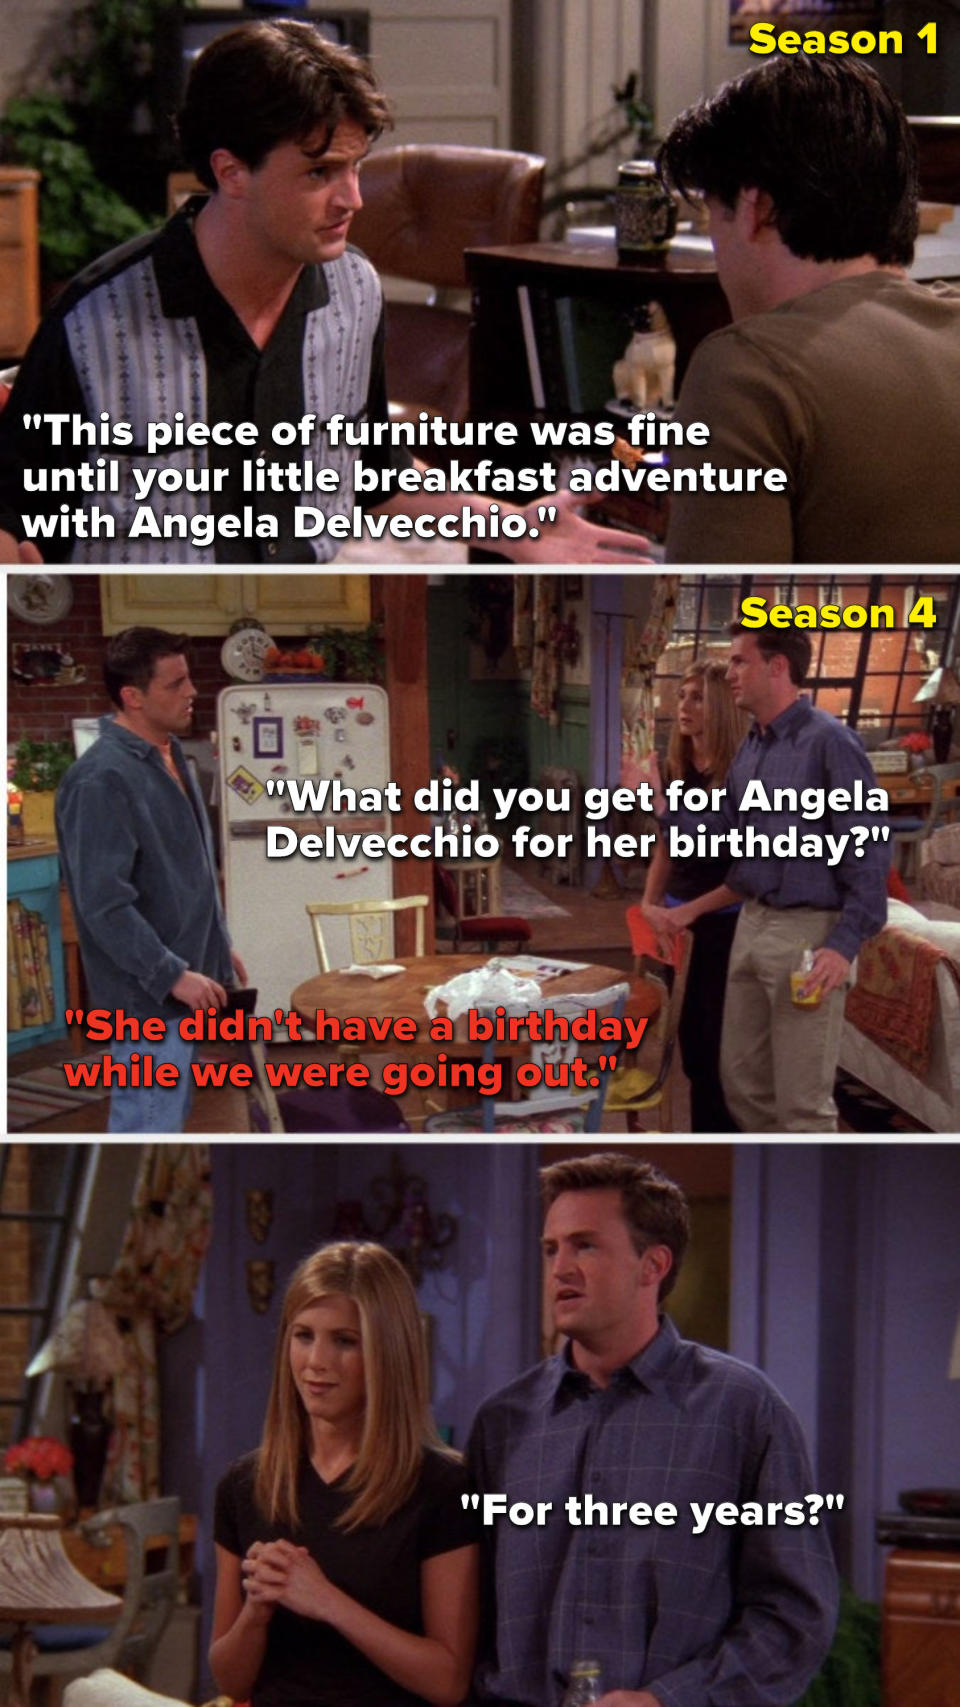 Chandler says, "It was fine until your breakfast adventure with Angela Delvecchio," then in Season 4 Chandler says, "What did you get for Angela Delvecchio" Joey says, "She didn't have a birthday while we were going out," and Chandler asks, "For 3 years"